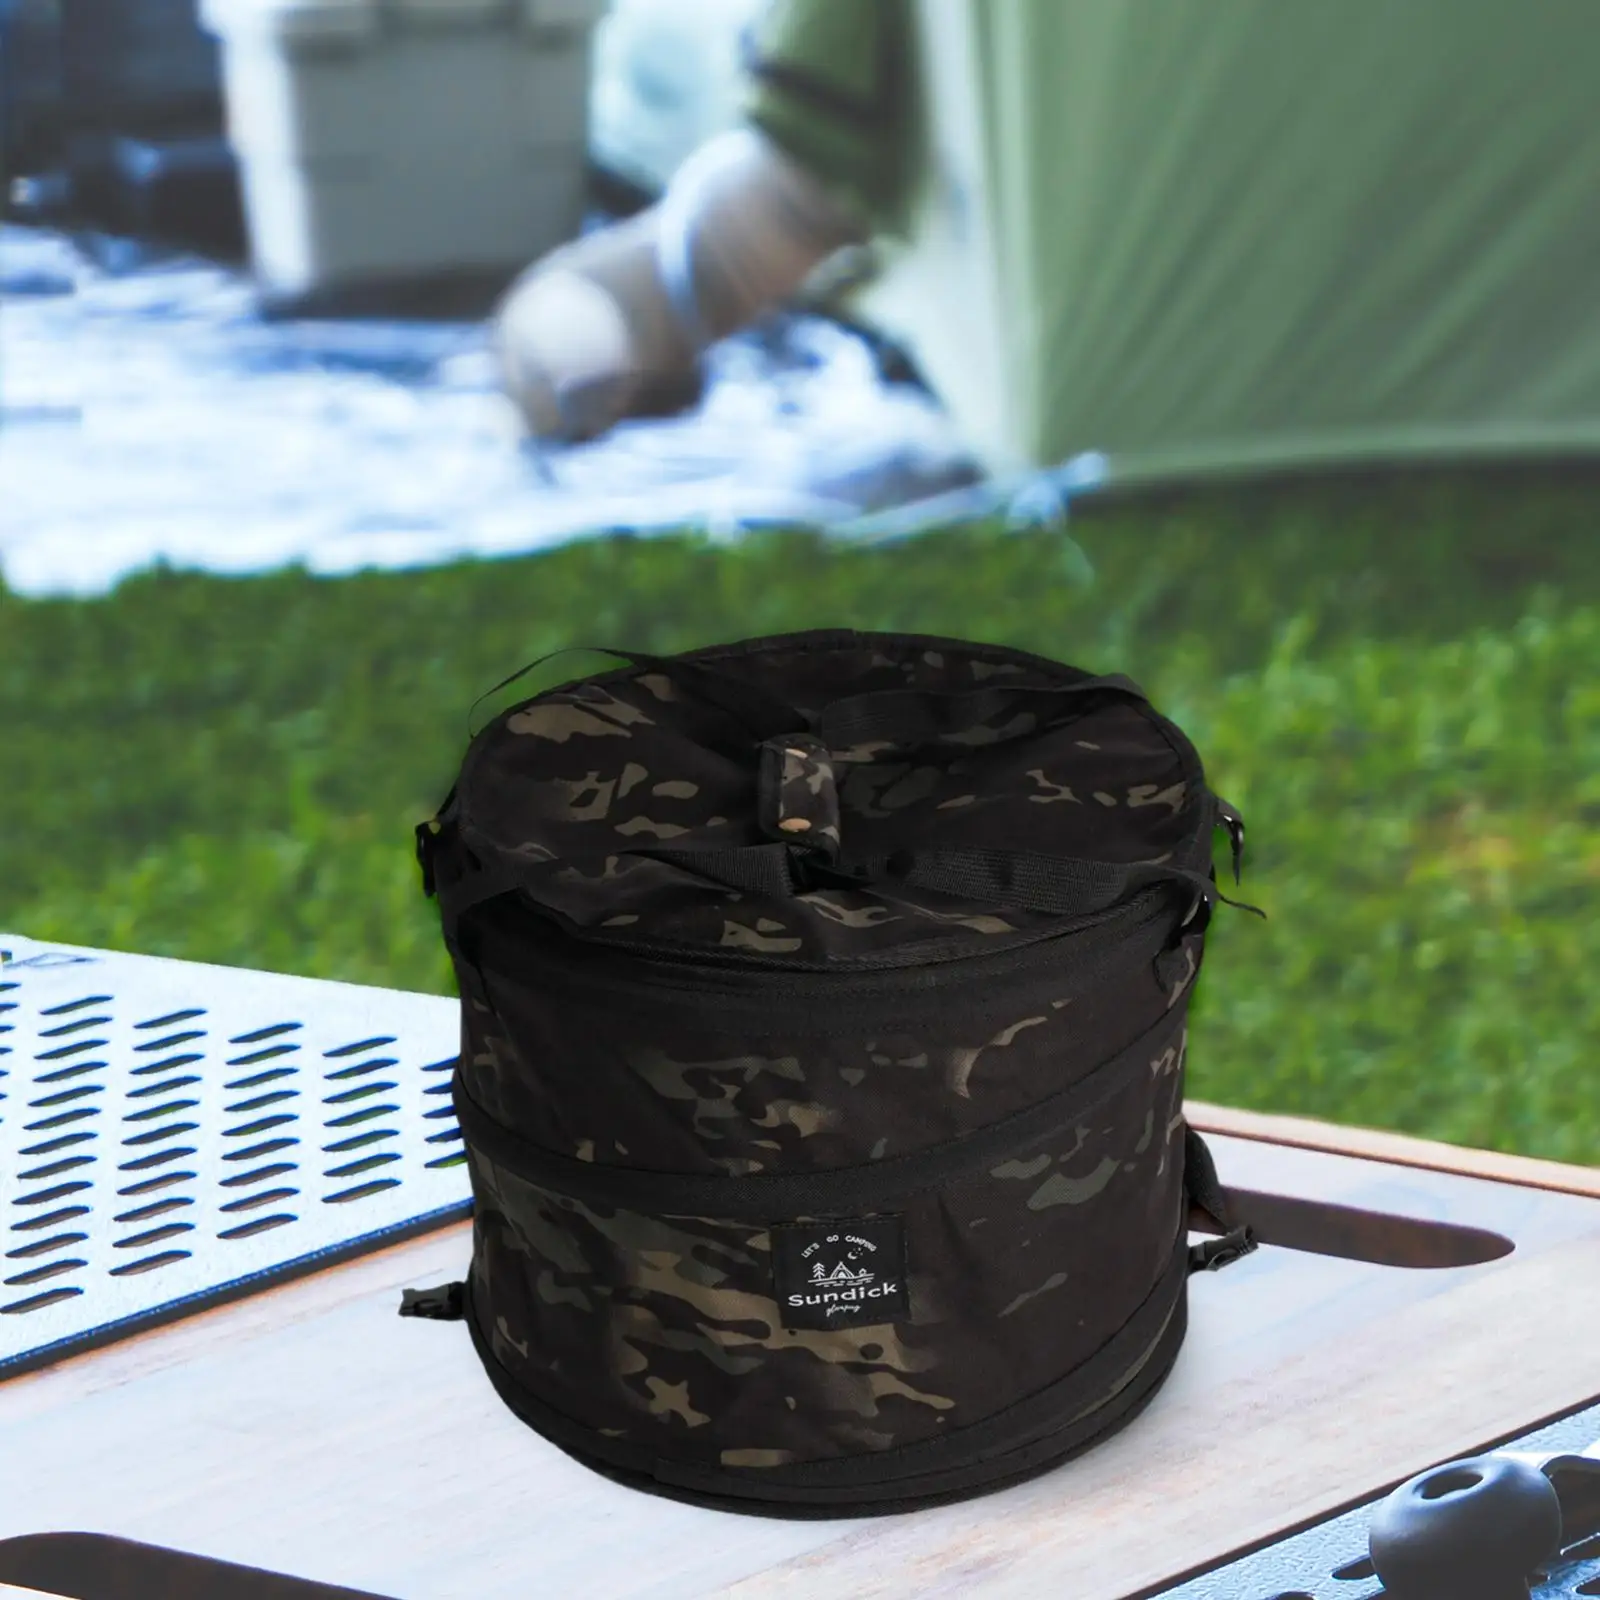 Collapsible Camping Trash Can Storage Basket with Belt Straps Recycle Bin